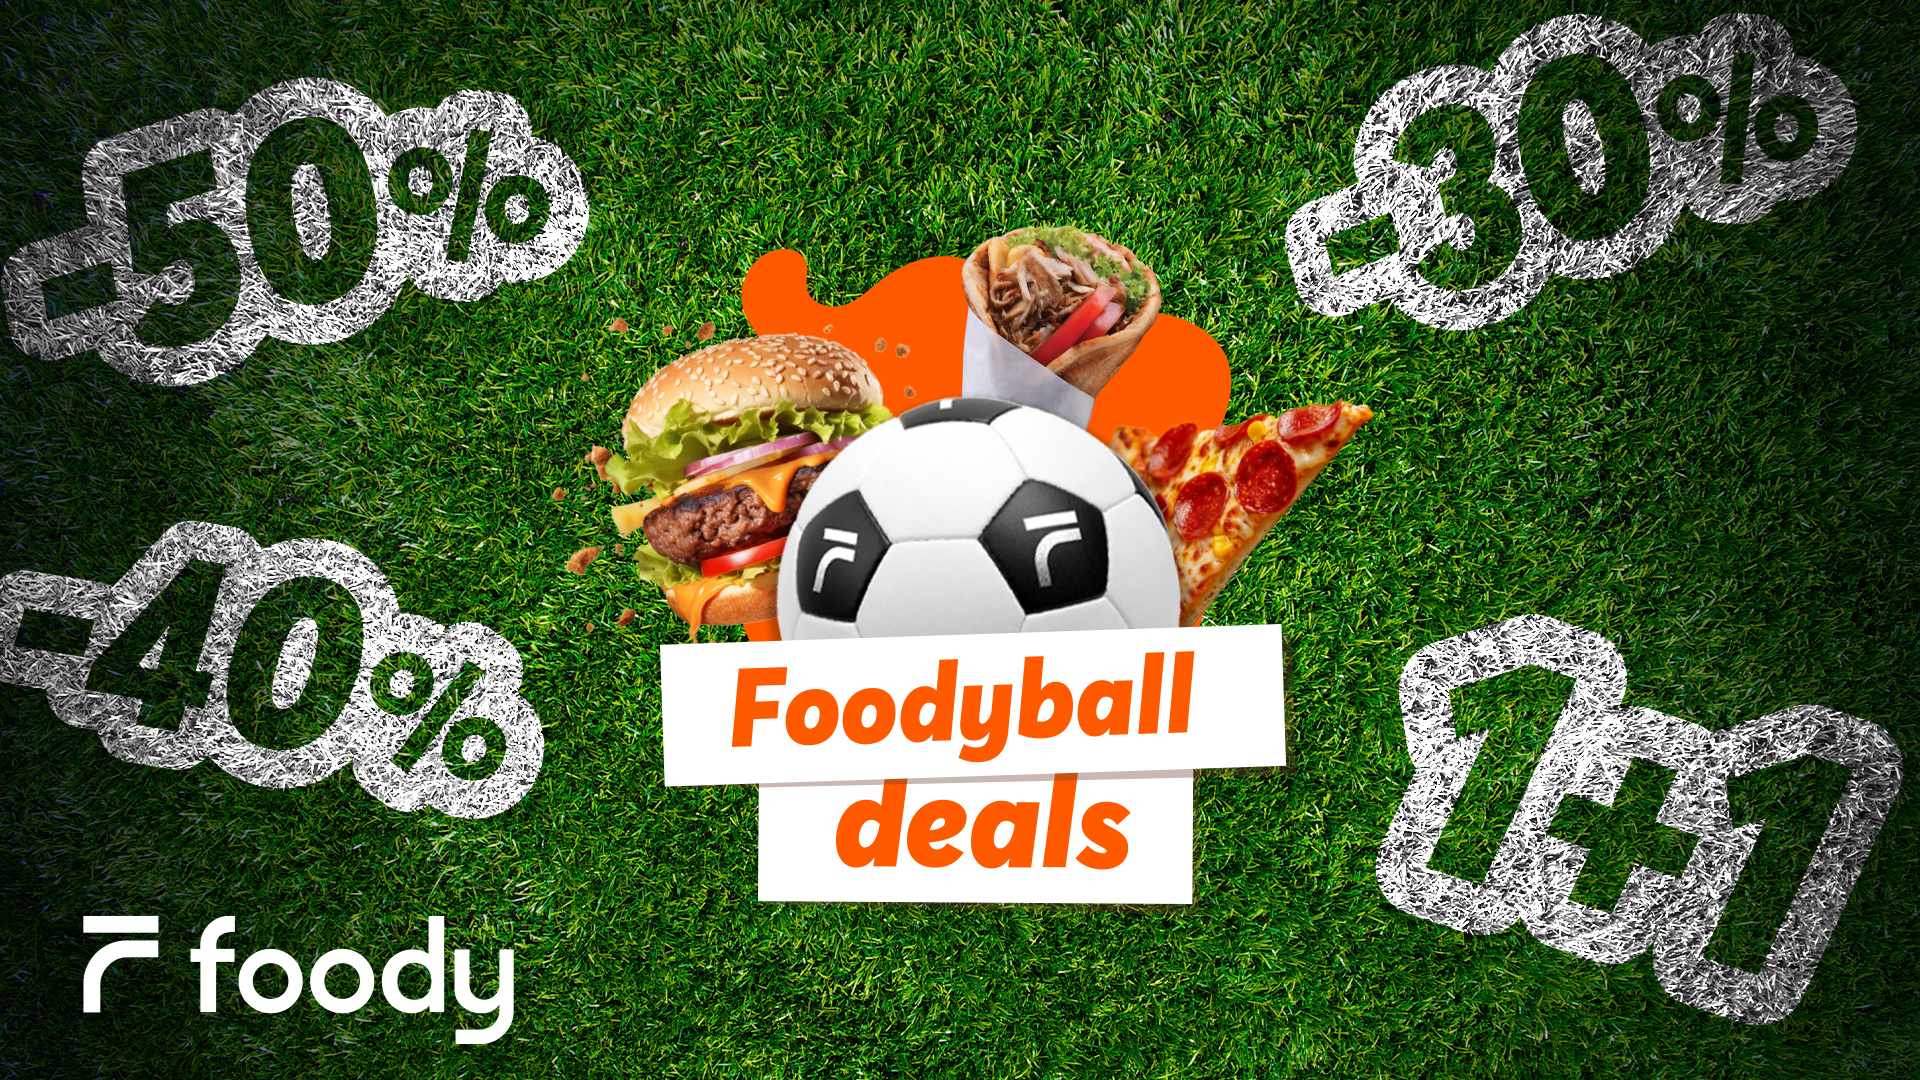 Foody… “triples” with new Foodyball Deals!